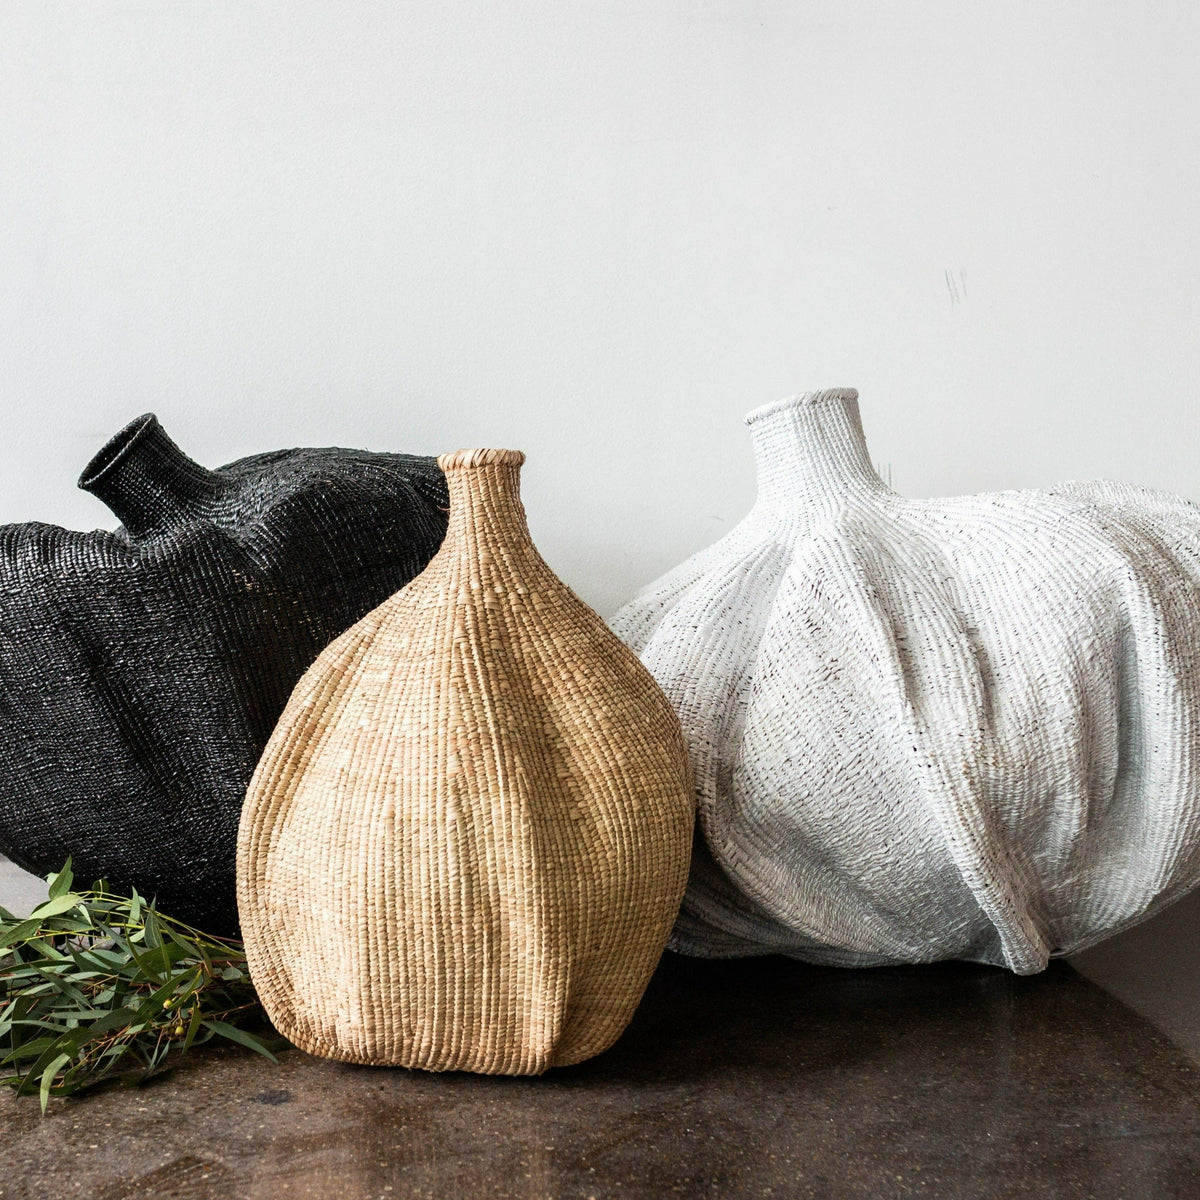 Limited Edition Black Garlic Gourd kanju interiors best seller desirable - Indoor outdoor basket floor hand woven handwoven grass modern luxury traditional durable sustainable stylish contemporary boho rustic storage home goods gift unique planter elegant eclectic ilala palm one of a kind organic shape natural wonky natural shelf table floor backyard Zimbabwe black